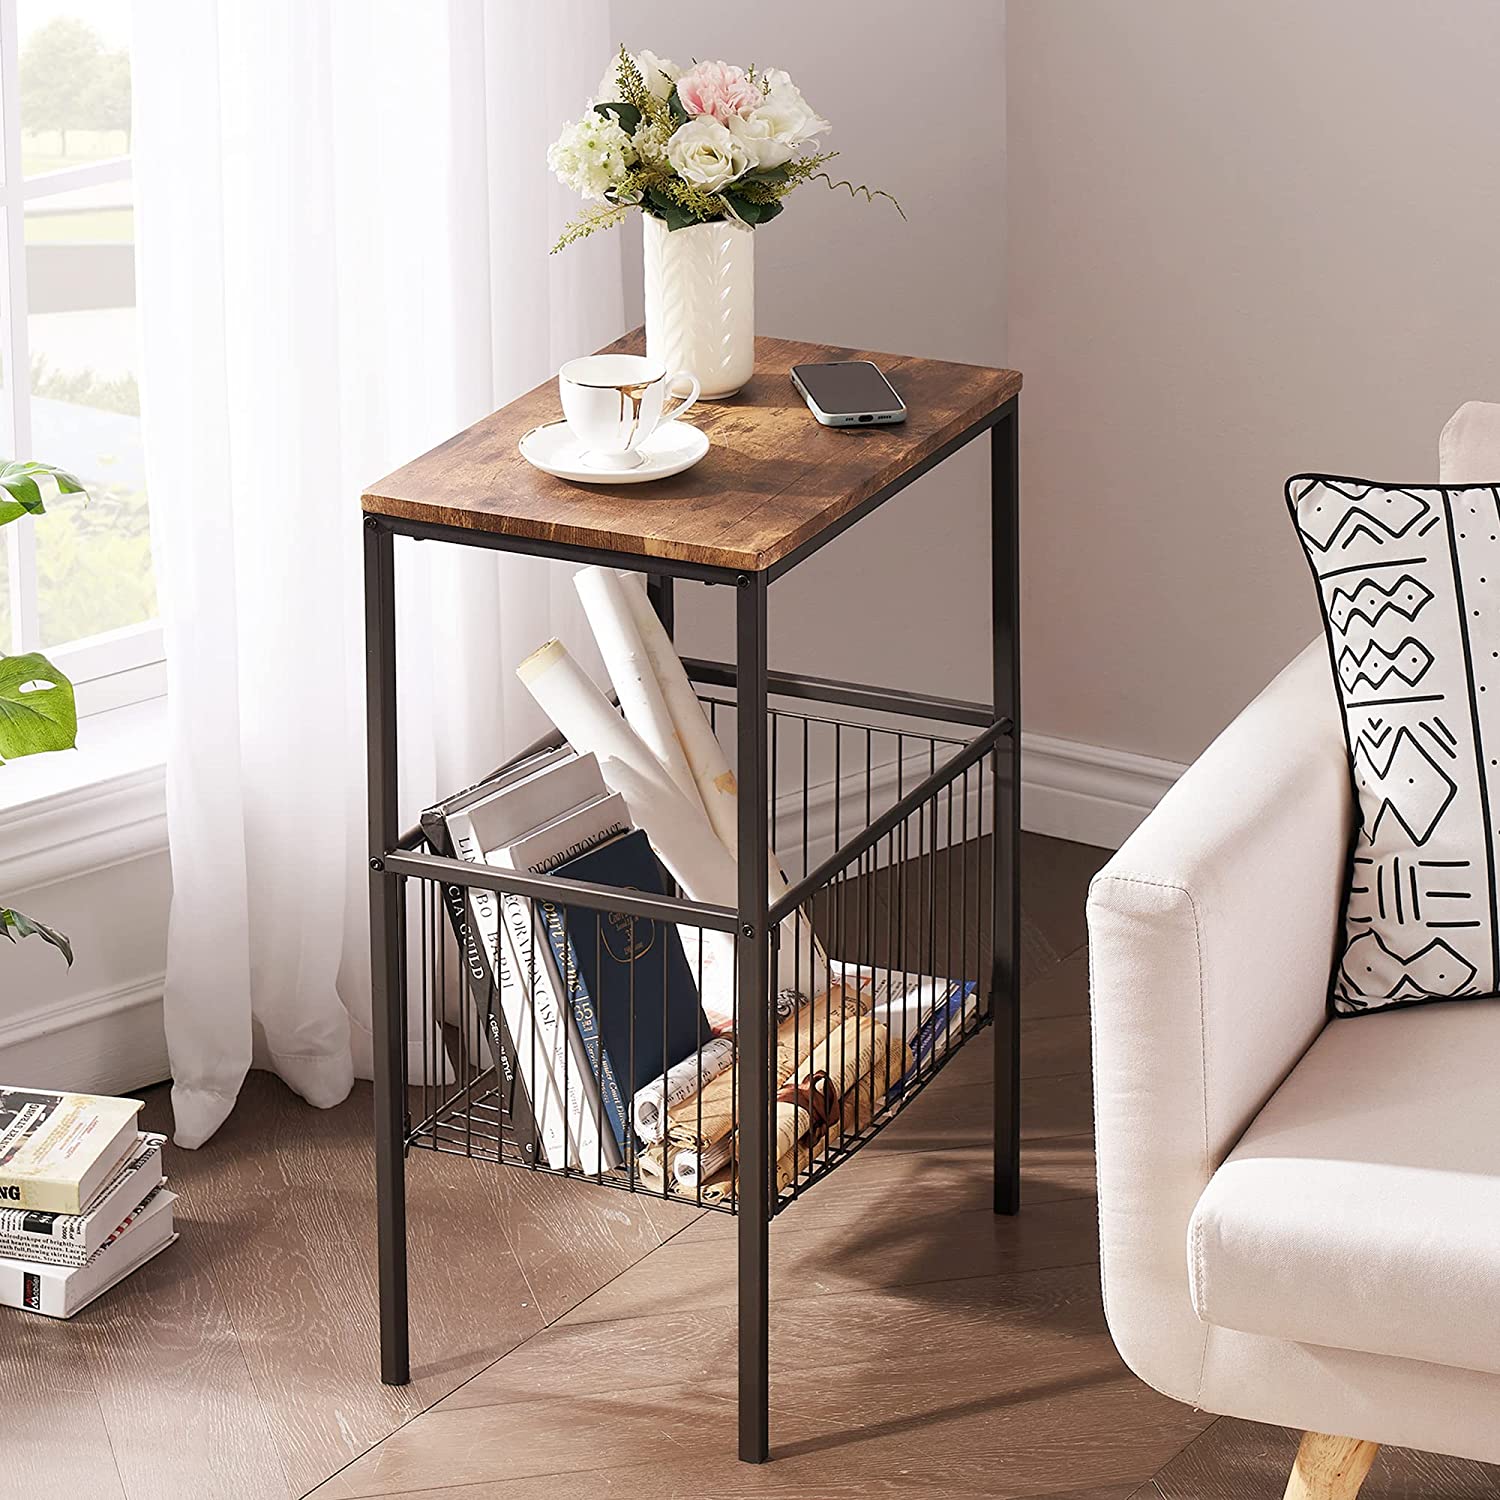 VECELO Versatile Side End Table 31” Tall Storage Organizer with Foldable Basket for Living Room/Bedroom